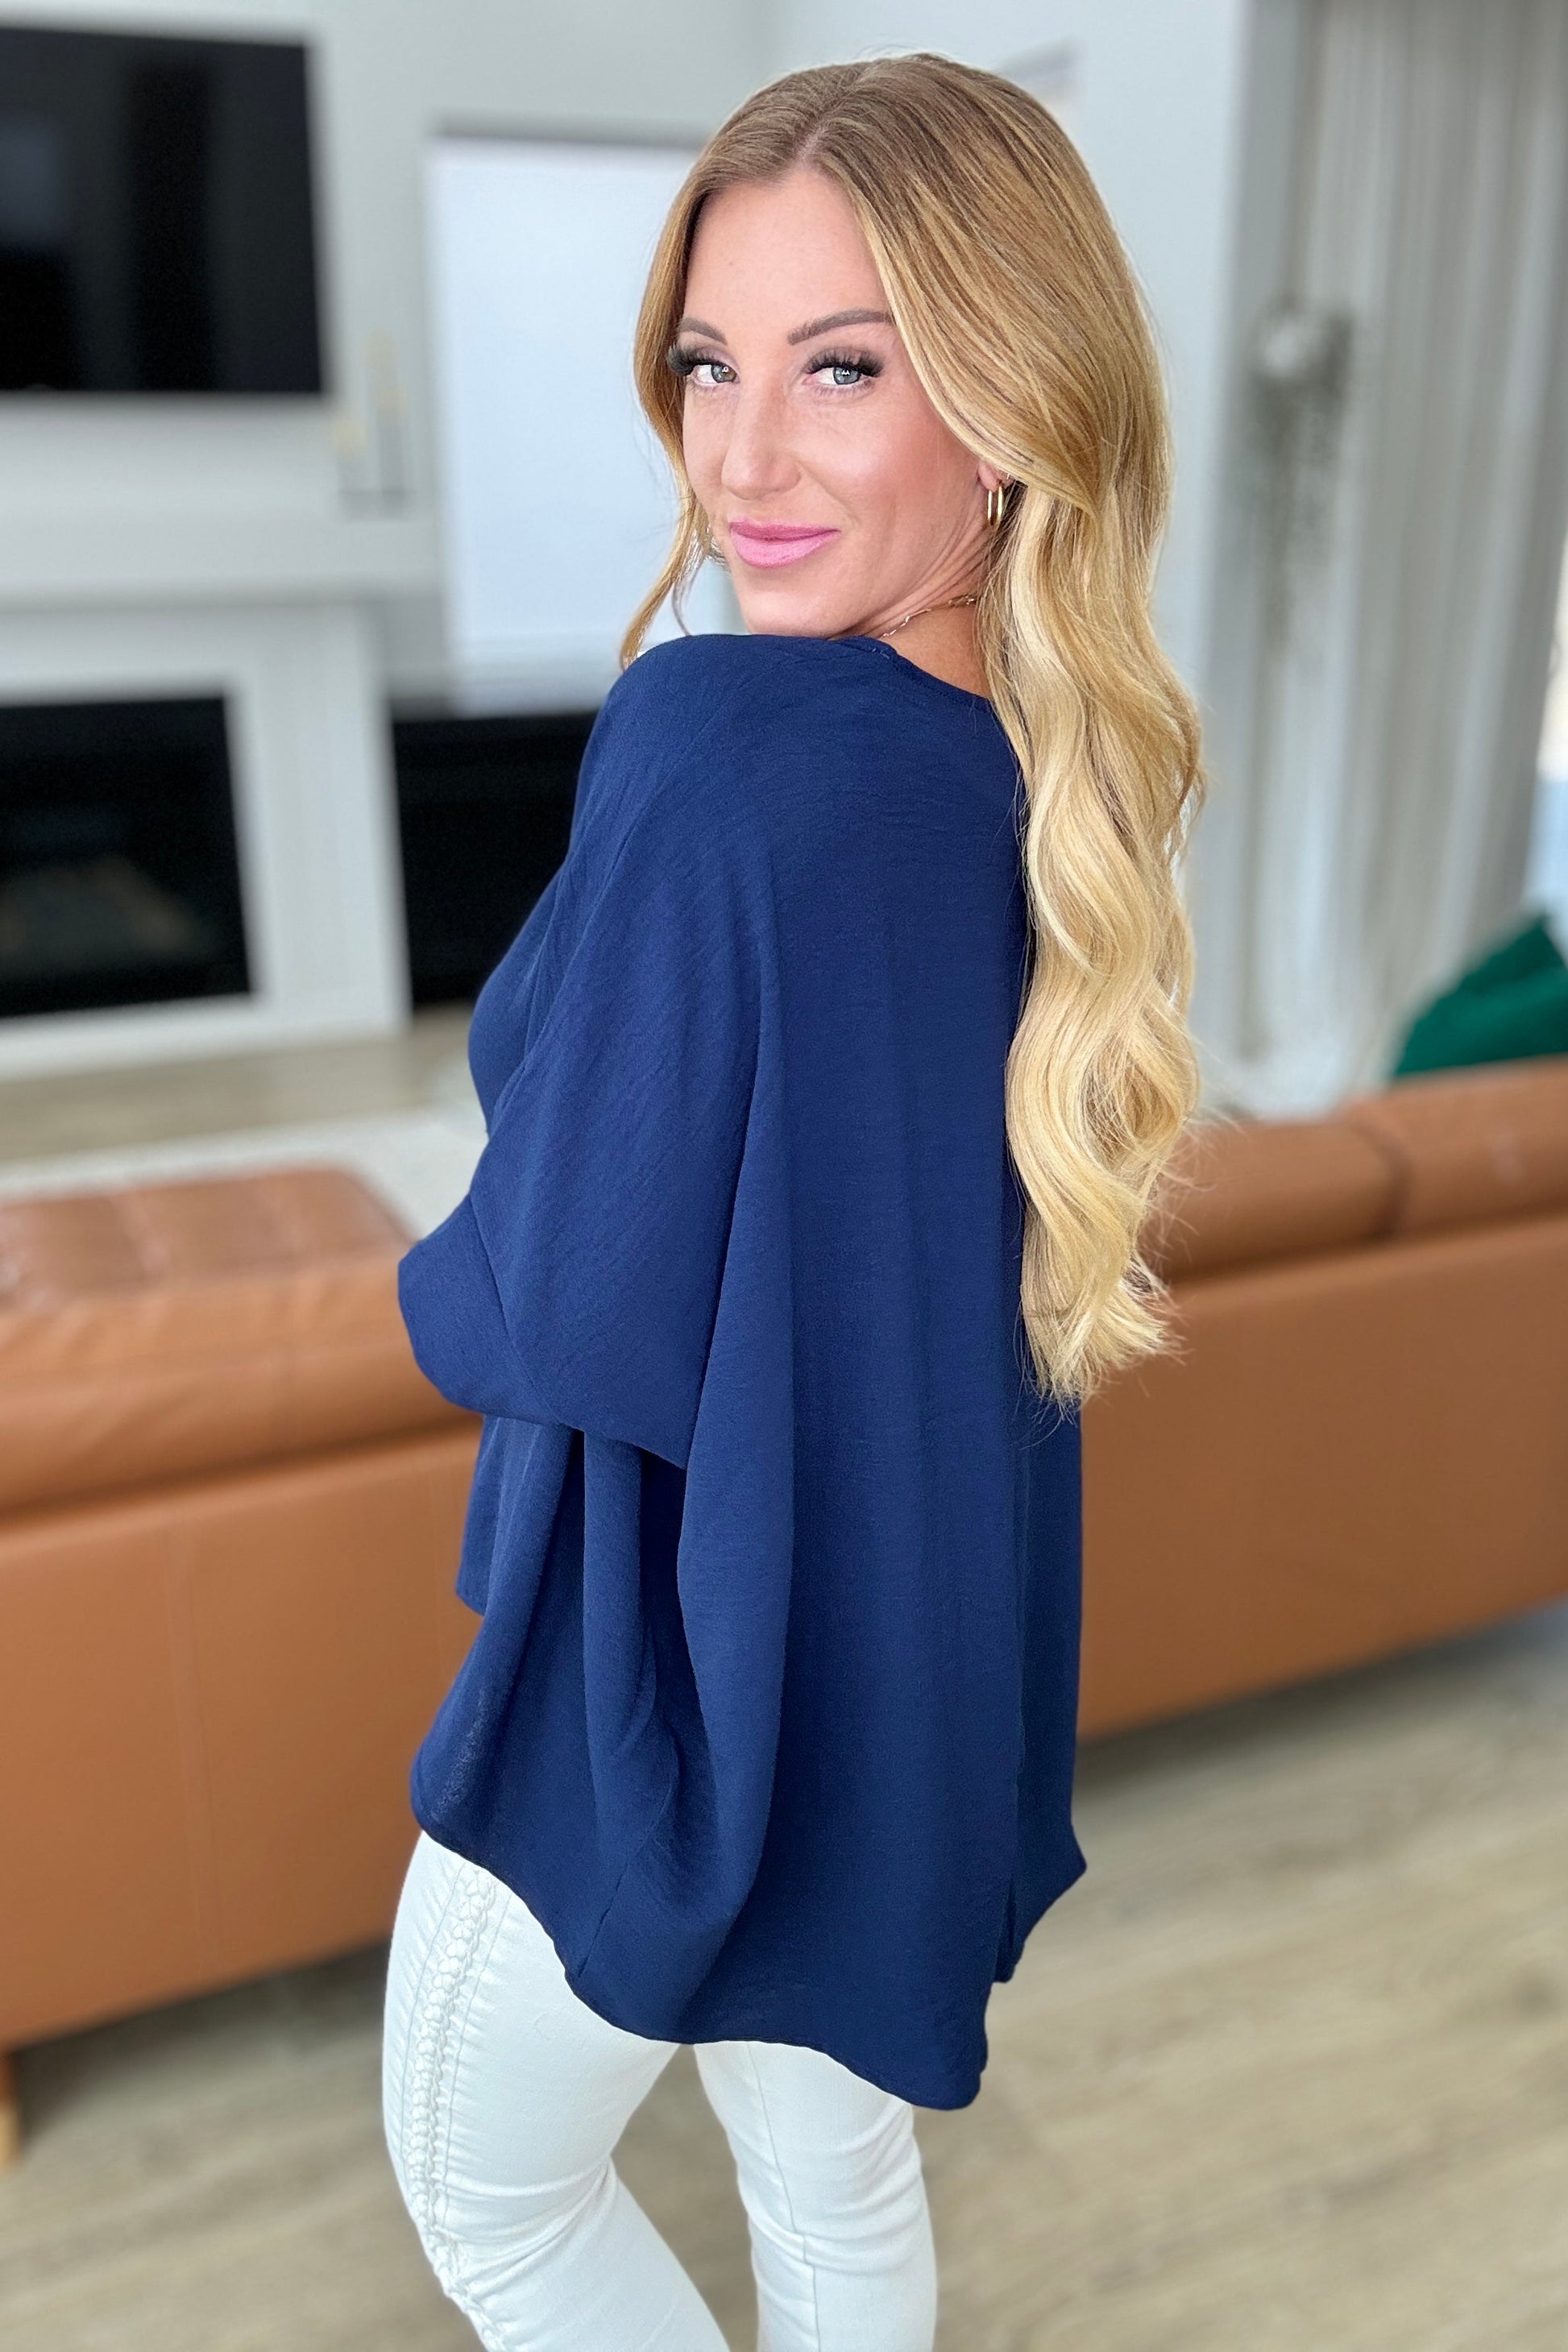 Feels Like Me Dolman Sleeve Top in Navy - Andree By Unit